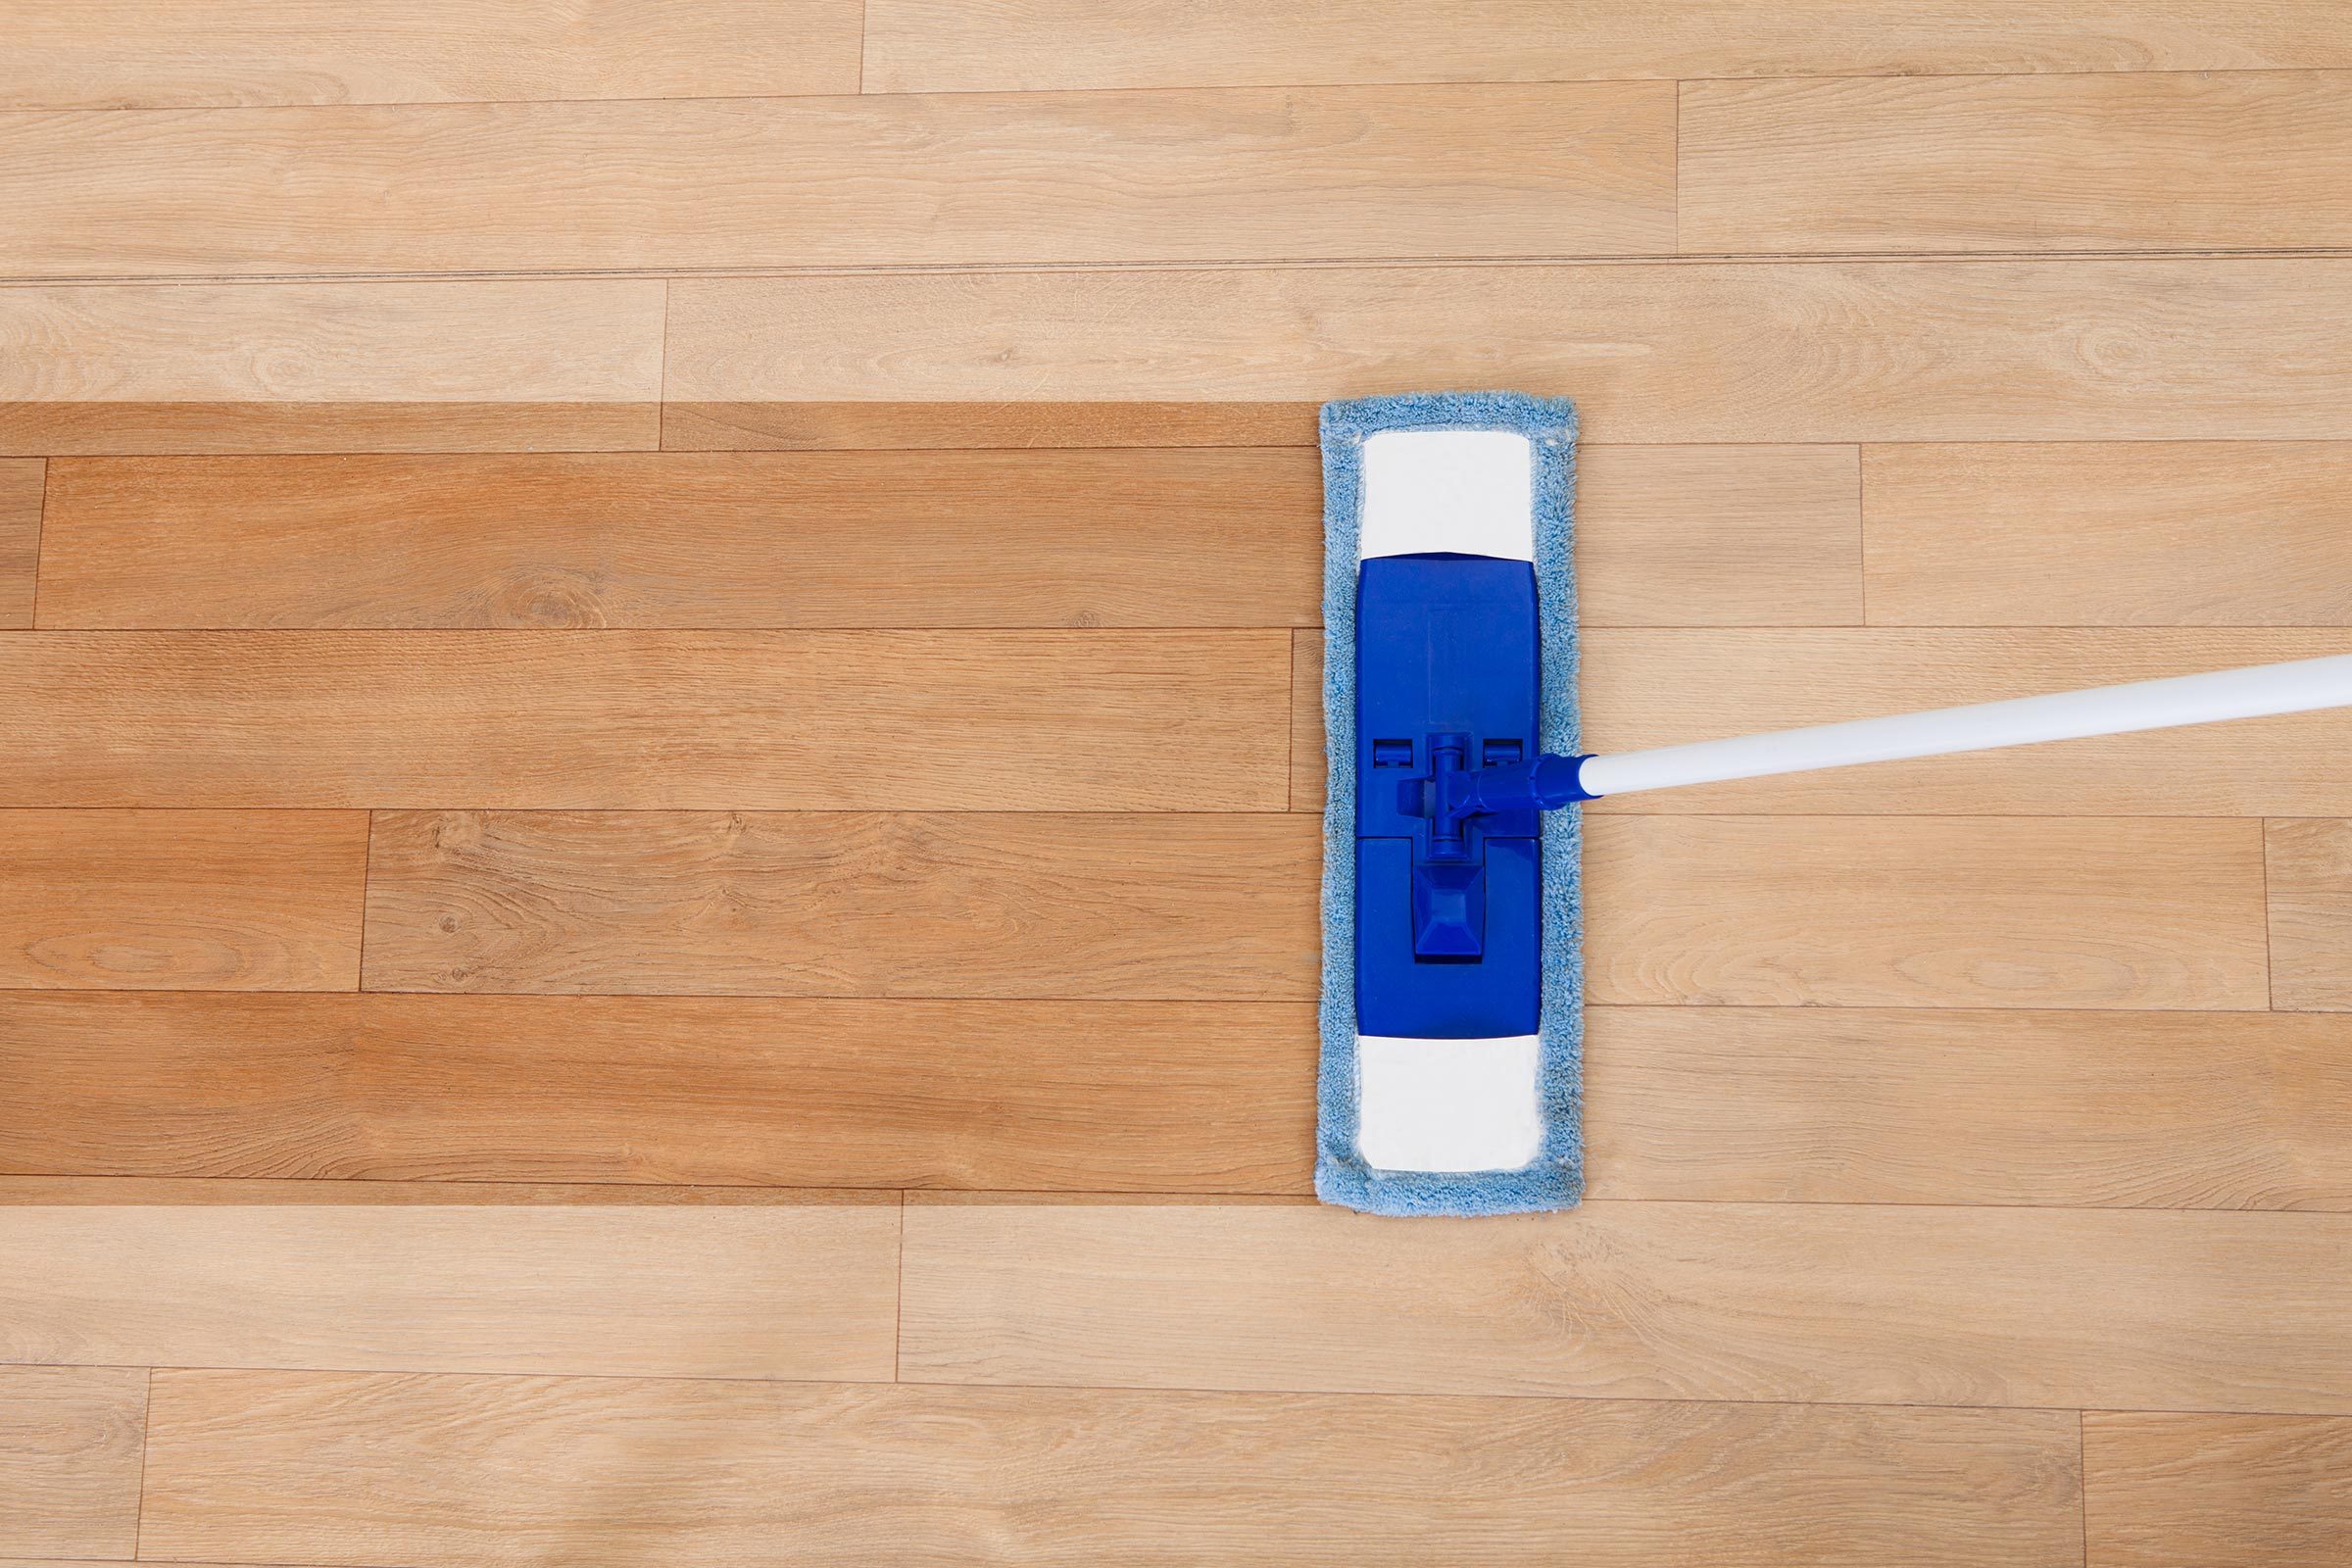 How to Take Care of and Clean Your New Luxury Vinyl Flooring: Tips and  Recommendations